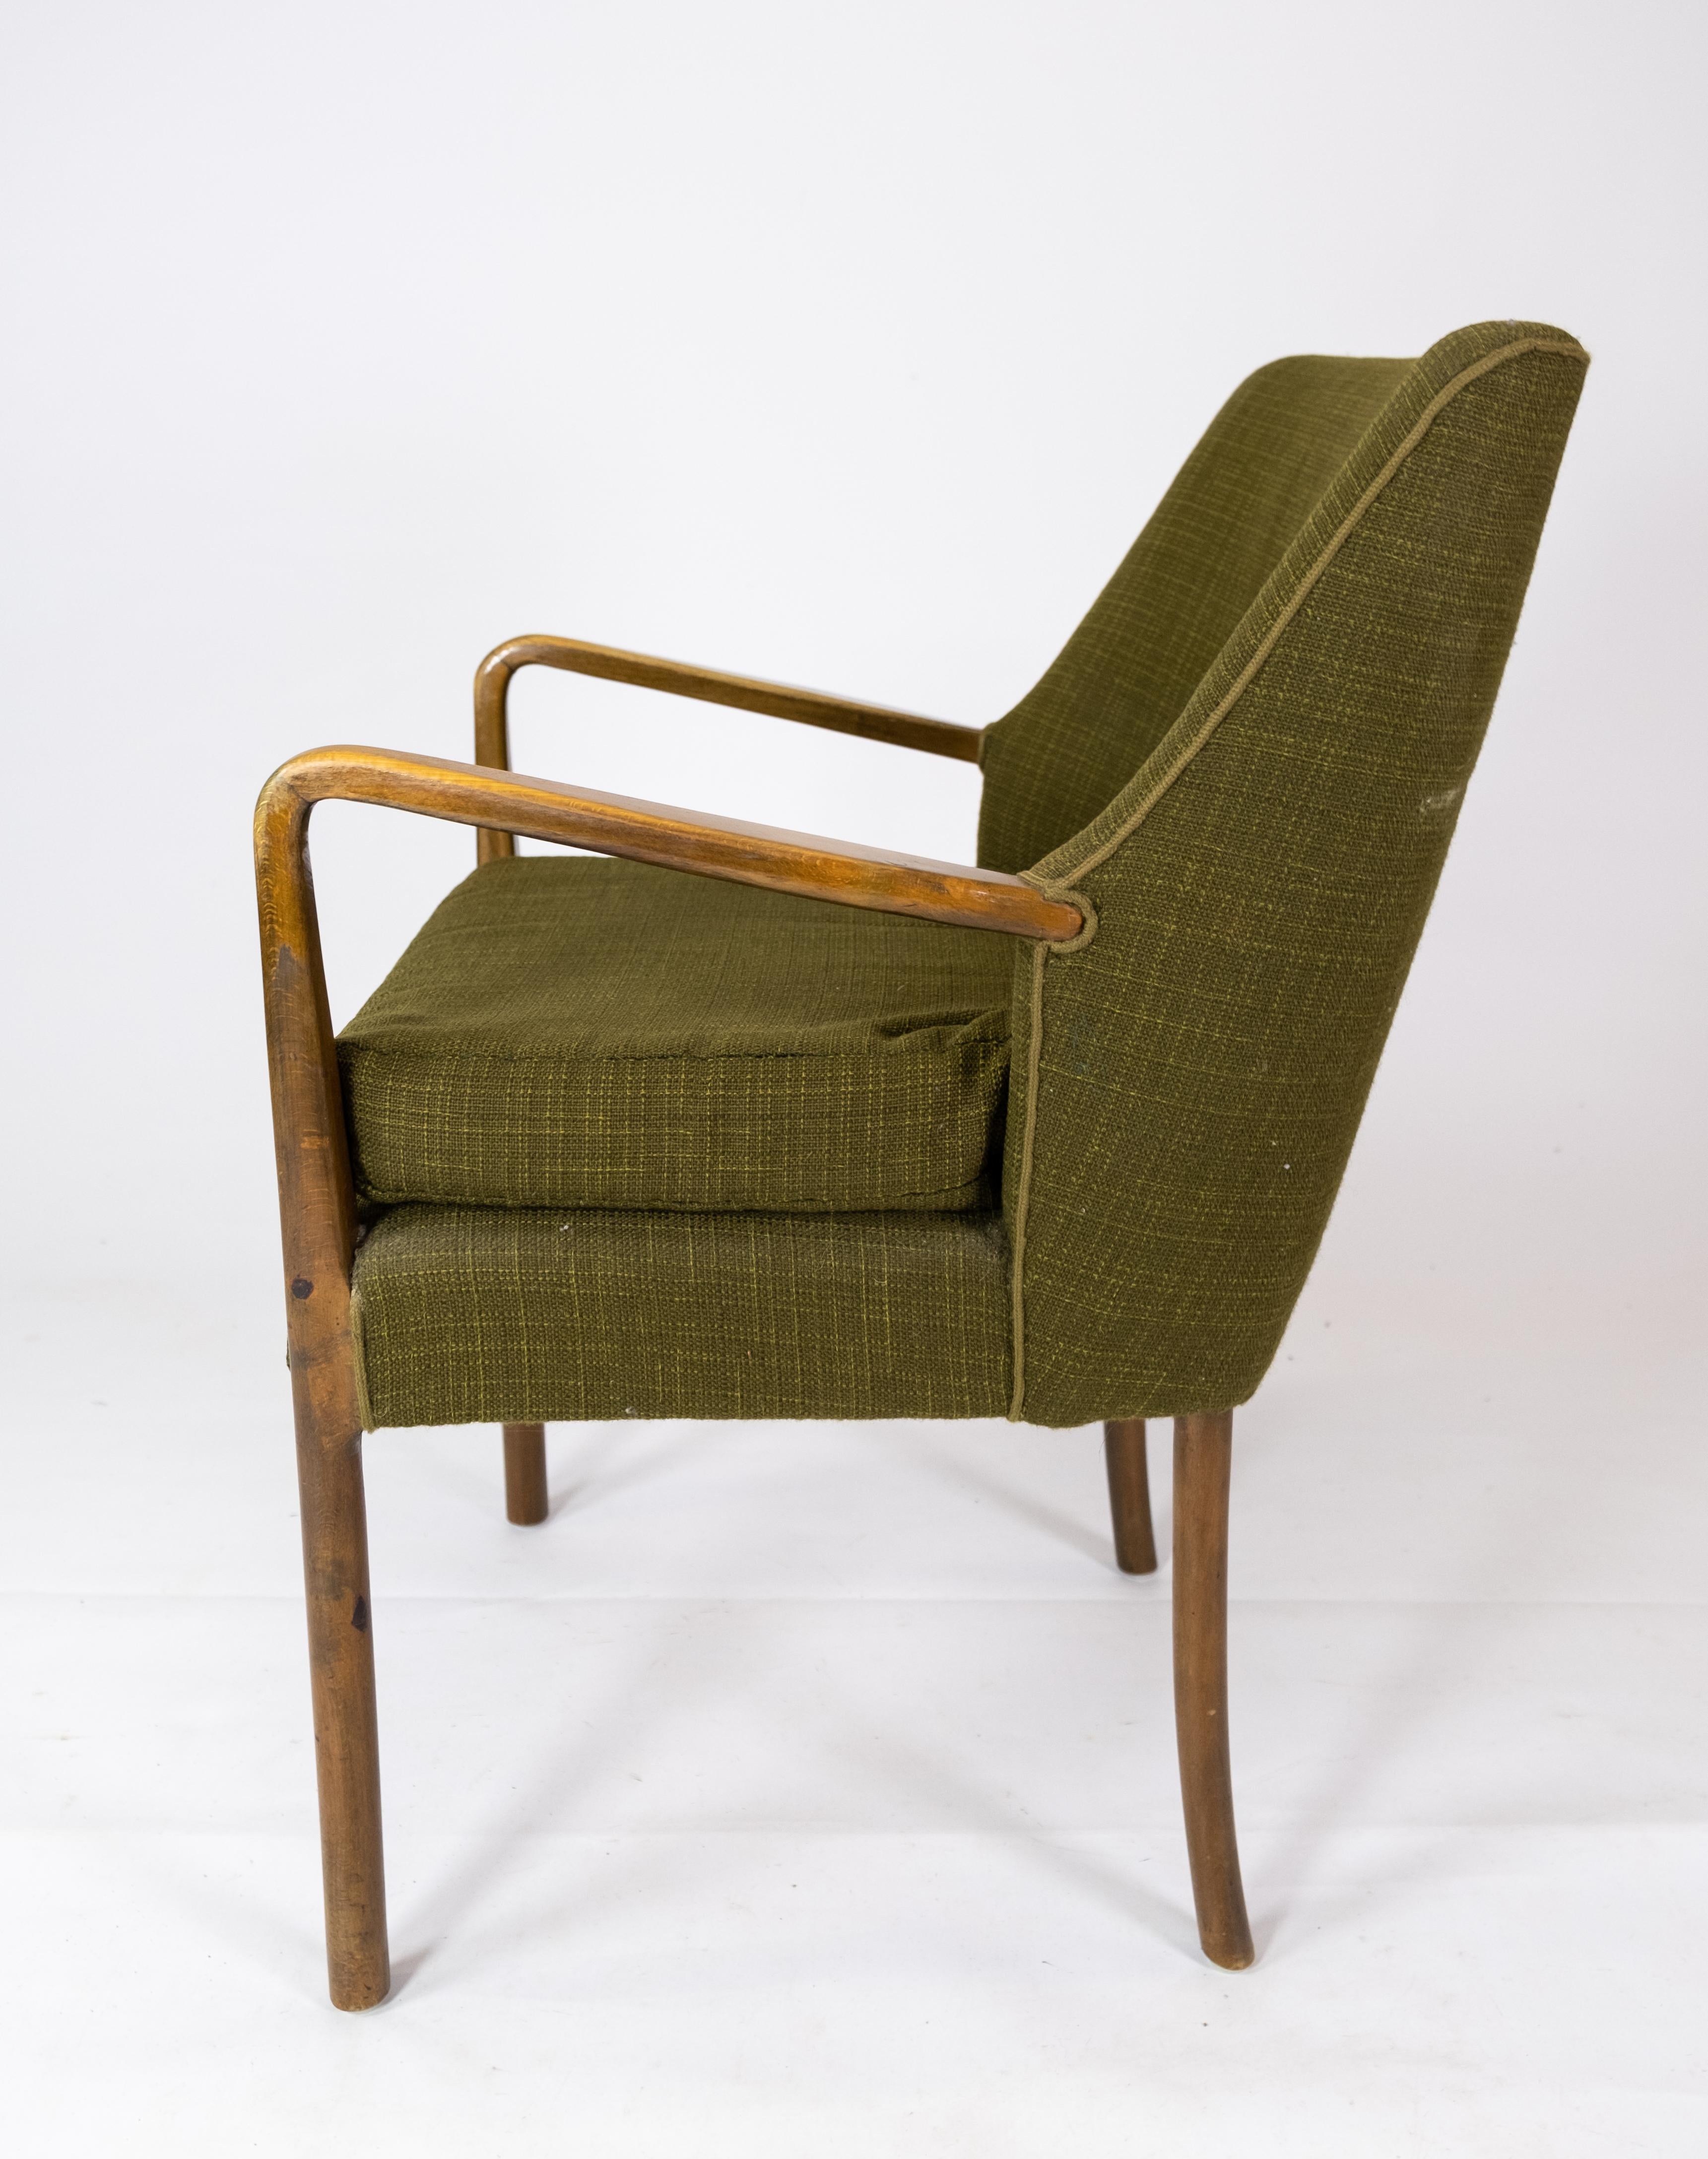 Armchair in Birch and Orginal Dark Green Fabric of Danish Design from the 1950s In Good Condition For Sale In Lejre, DK